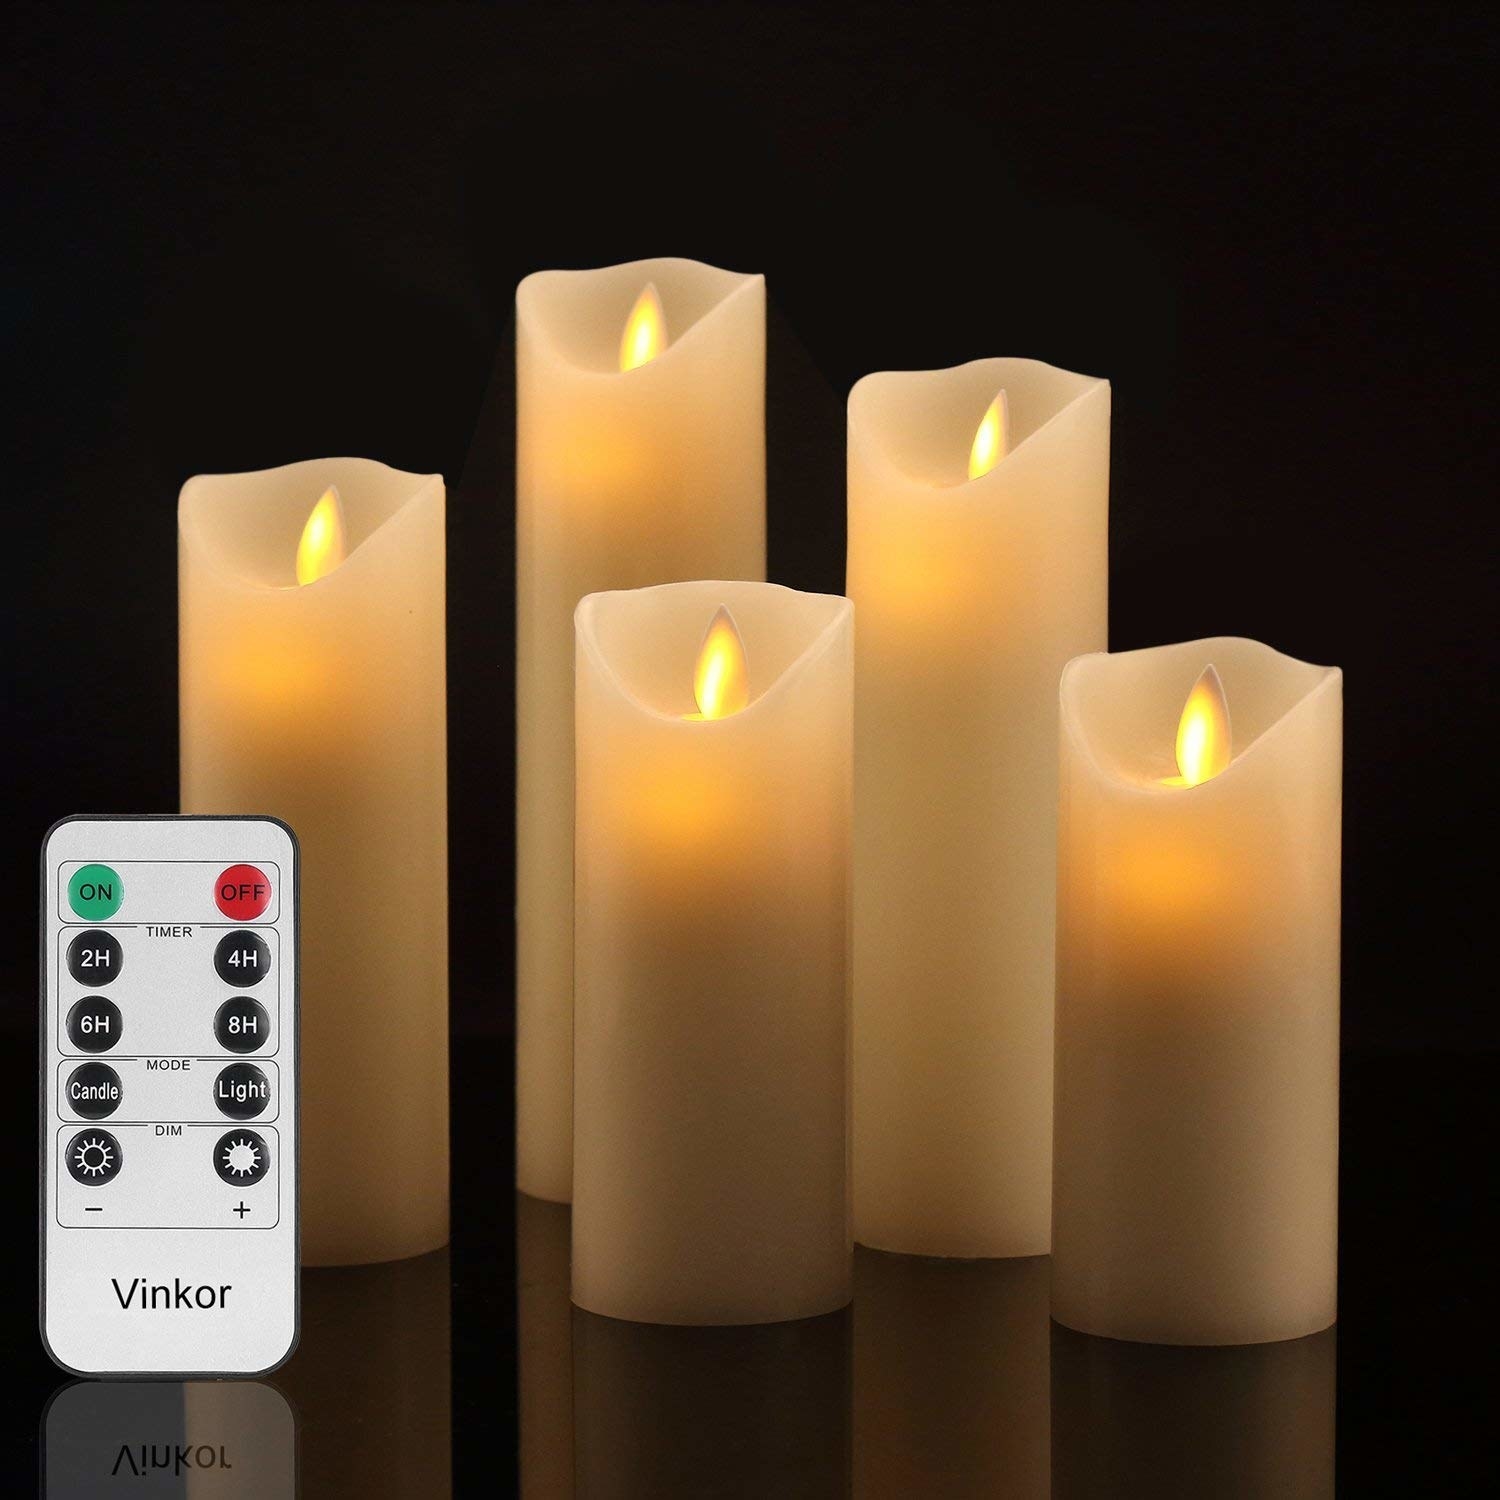 The candles in five different sizes, plus the remote